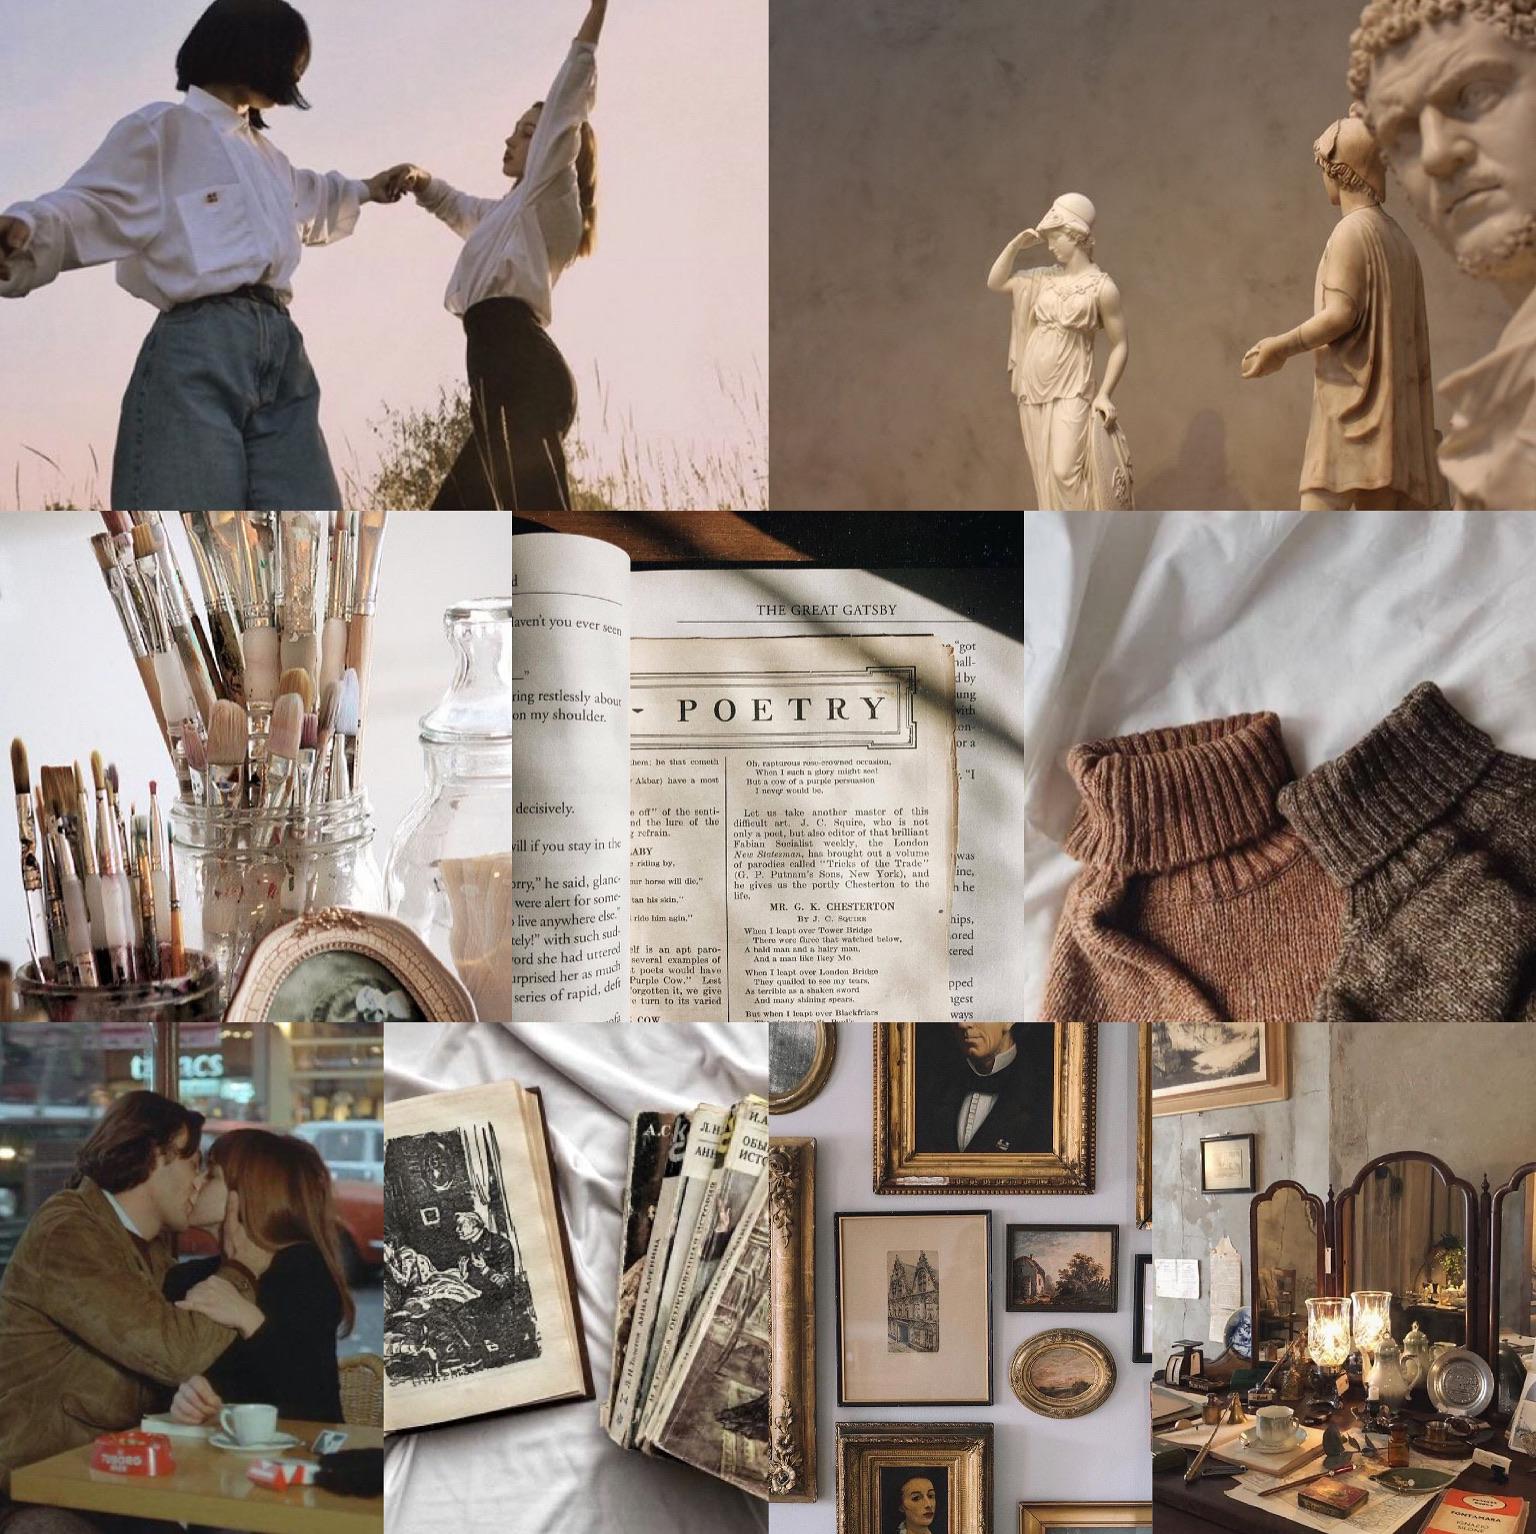 A collage of photos related to light academia. - Light academia